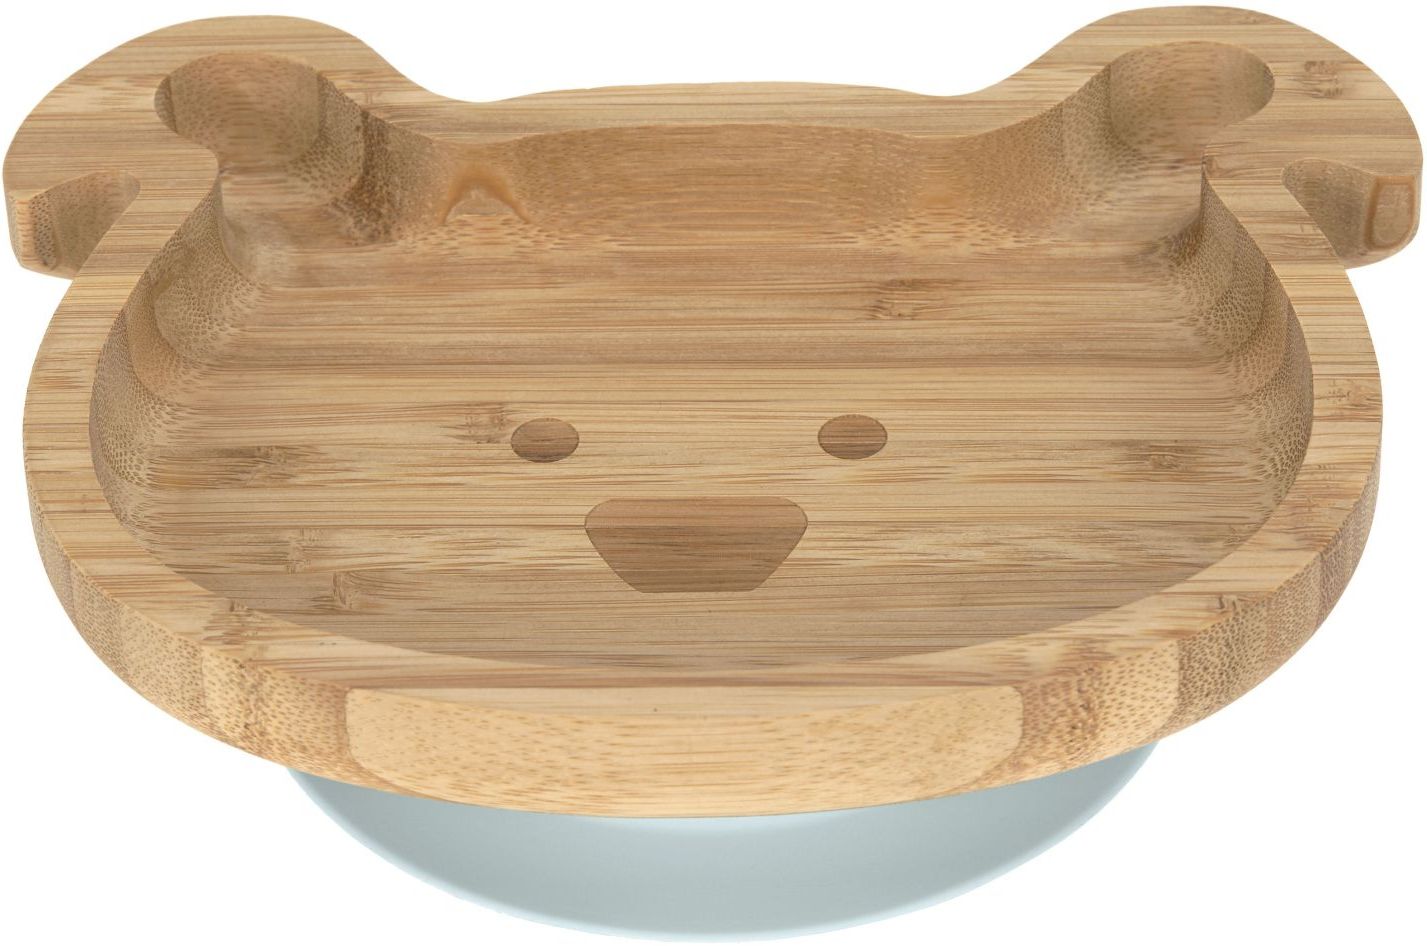 Lassig Platter Bamboo/Wood Little Chums Dog with suction pad/silicone